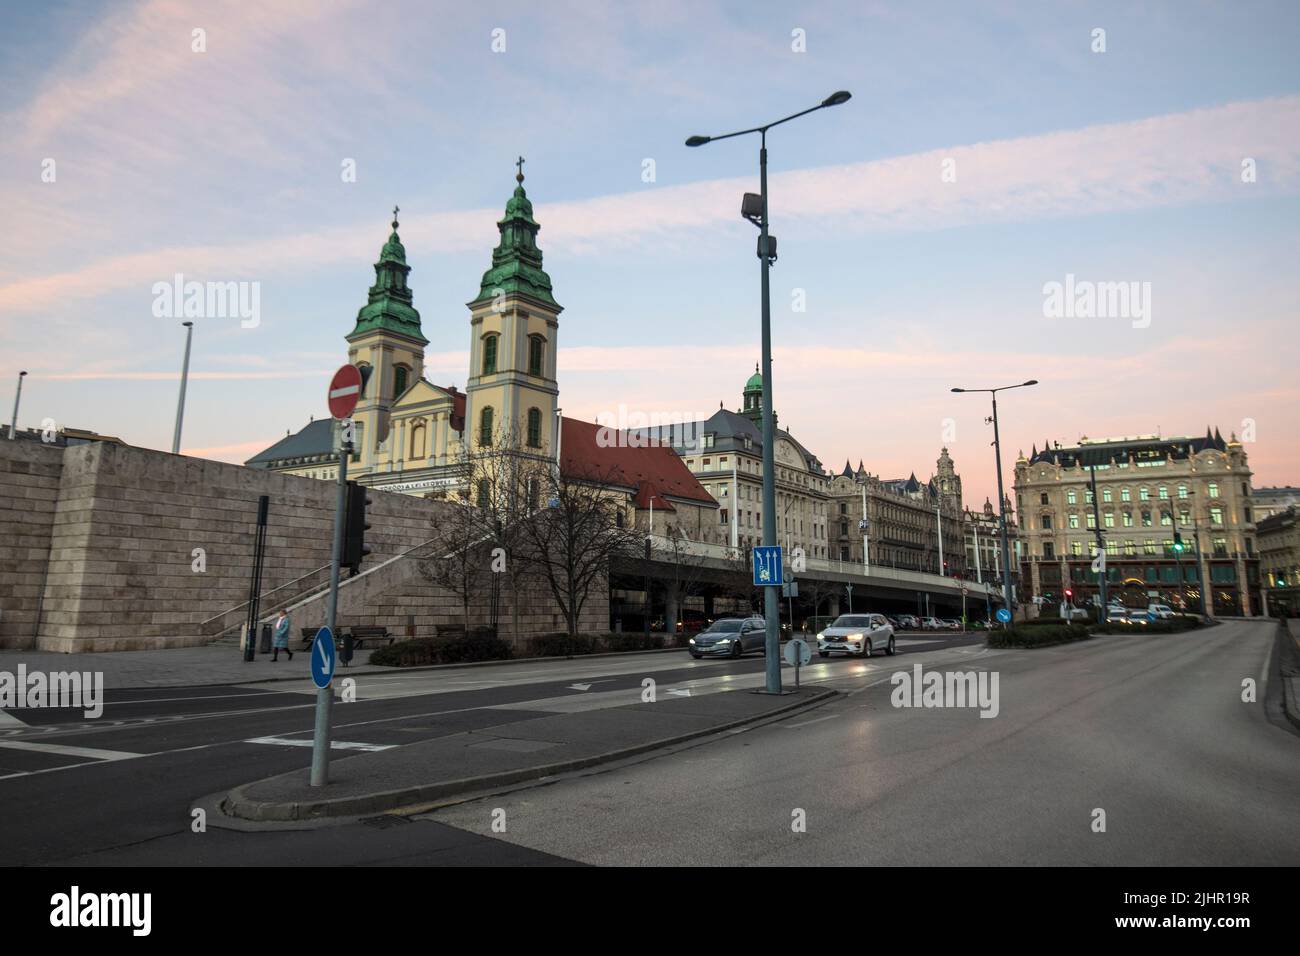 Budapest: March 15 Square. The Main Parish Church of the Assumption and Klotild Palaces. Hungary Stock Photo